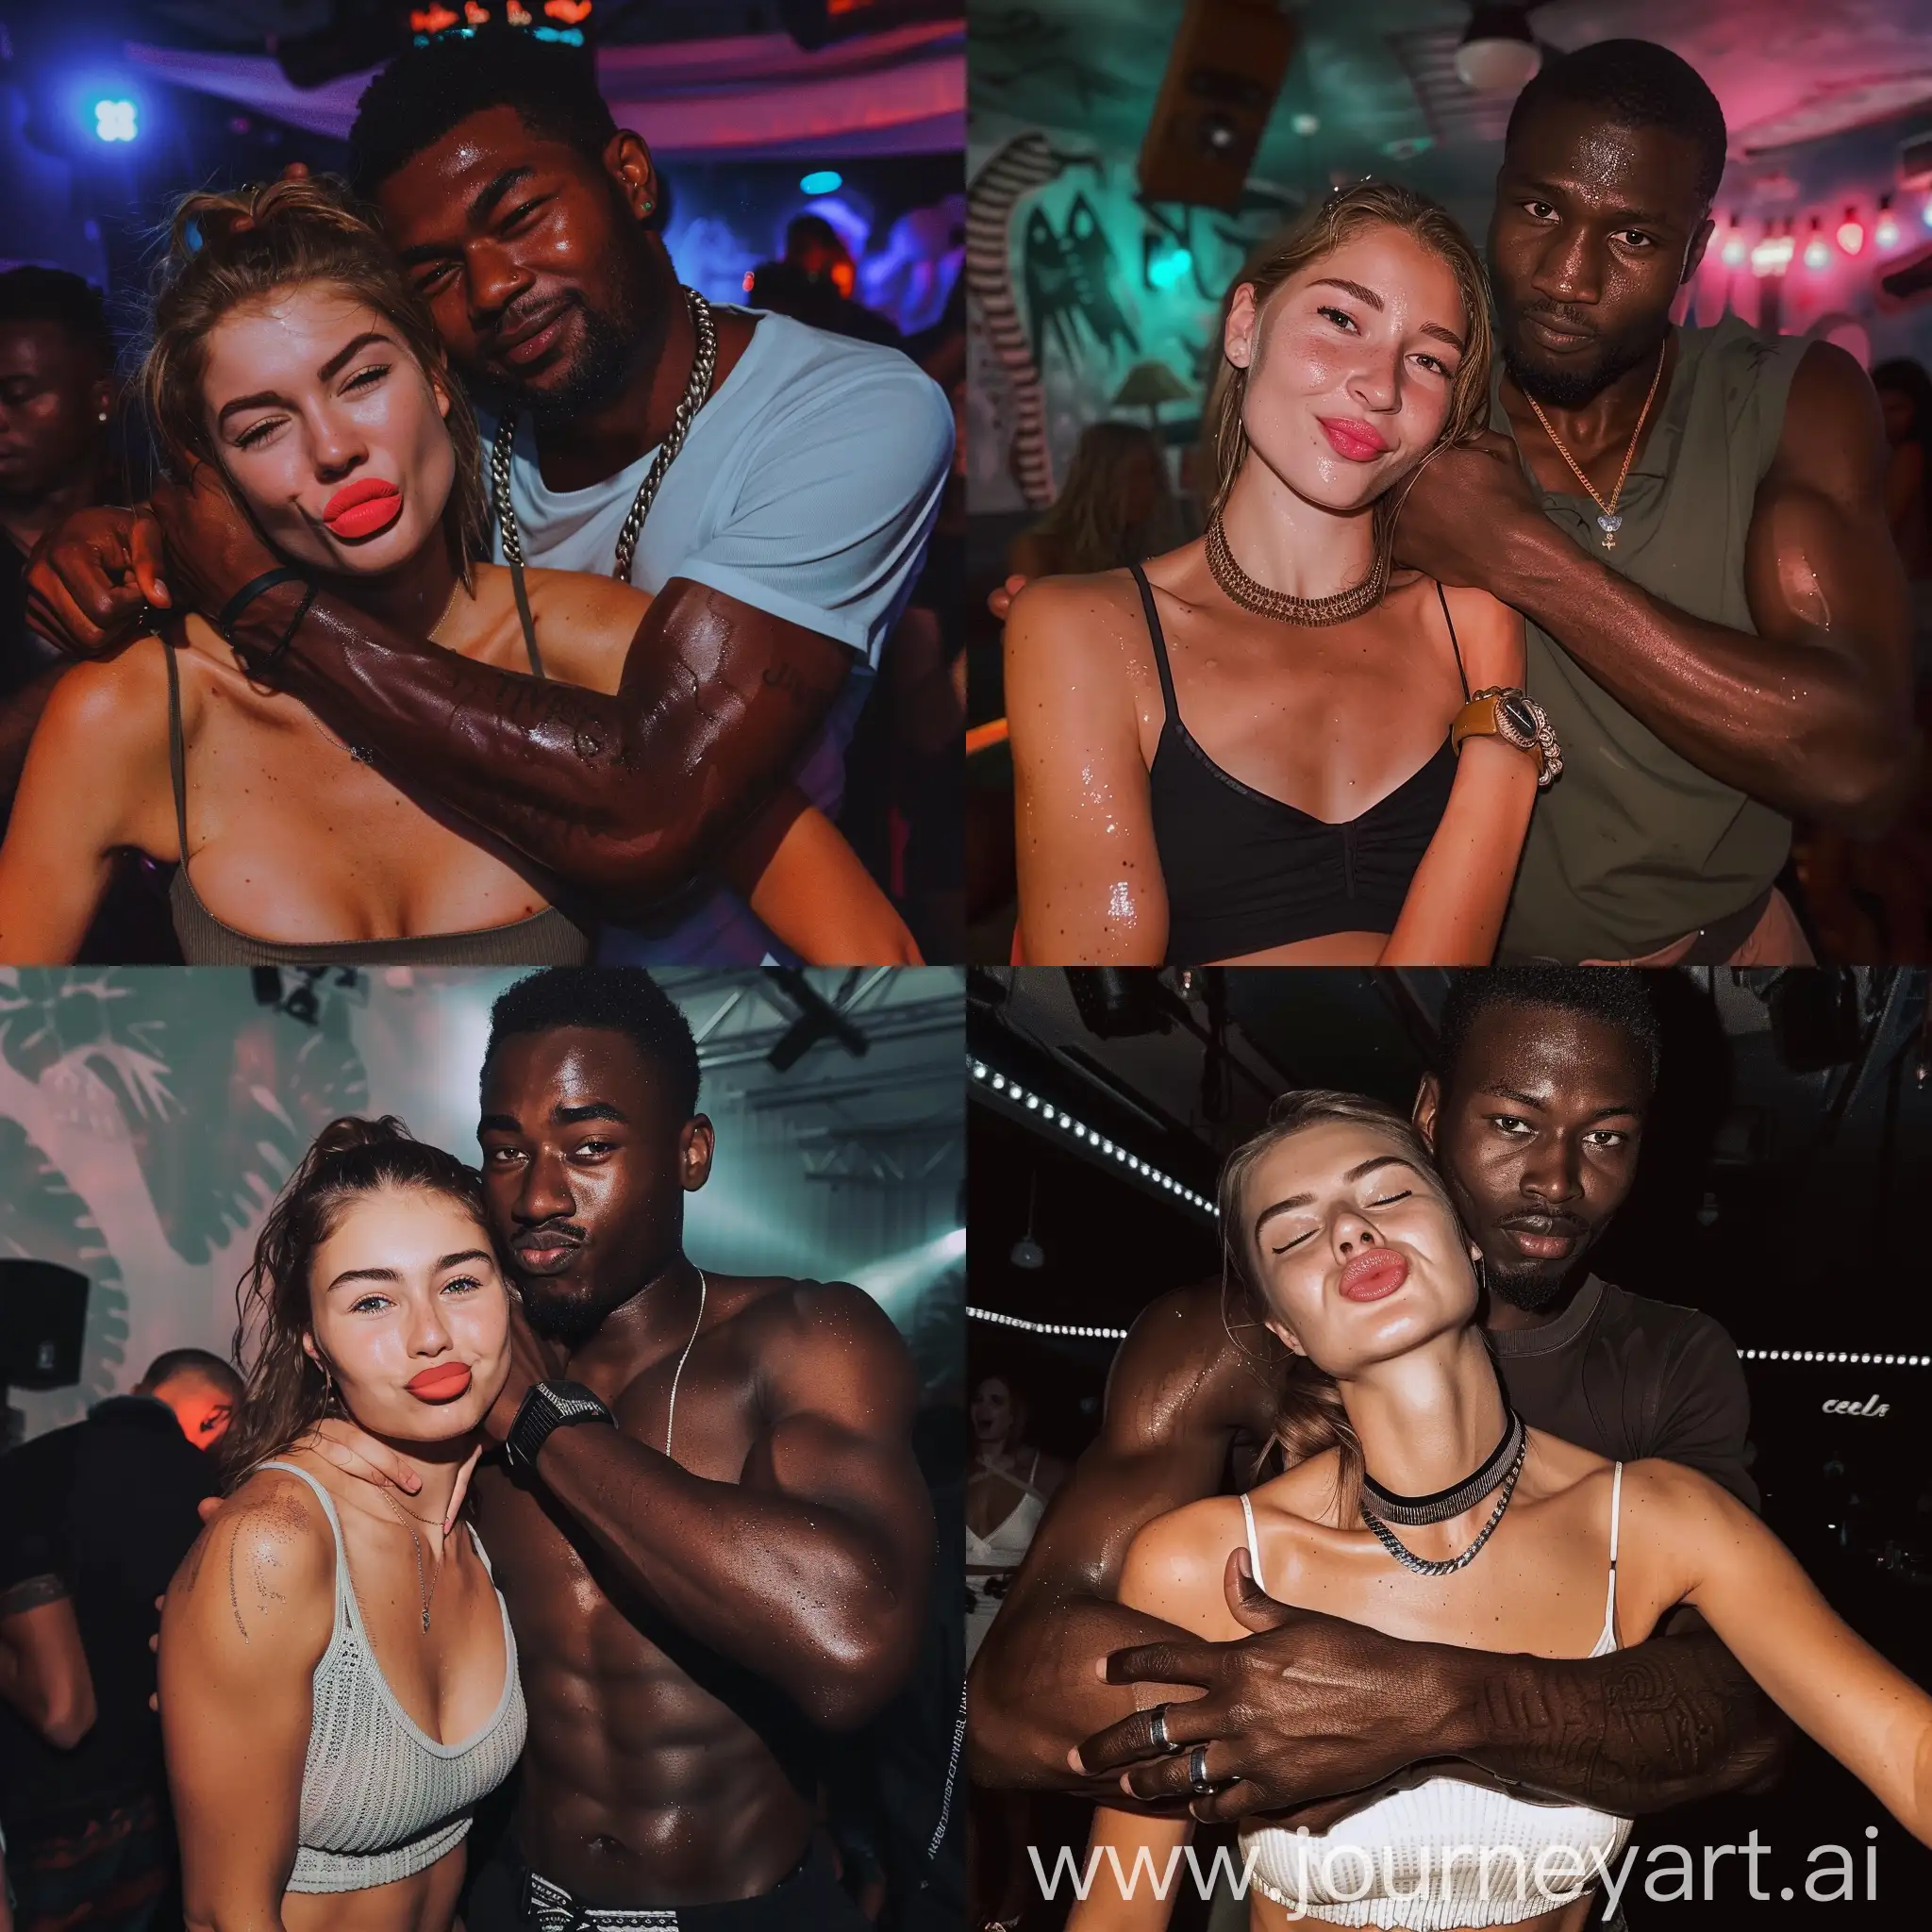 Aesthetic instagram selfie of a german woman in a party club crop-top getting hugged possessively by her tall robust african partner, she is doing the duck lips pose, her partner is grabbing her neck and smiling, the woman looks typically german and is beautiful, both are looking at the camera, sweaty, flirty